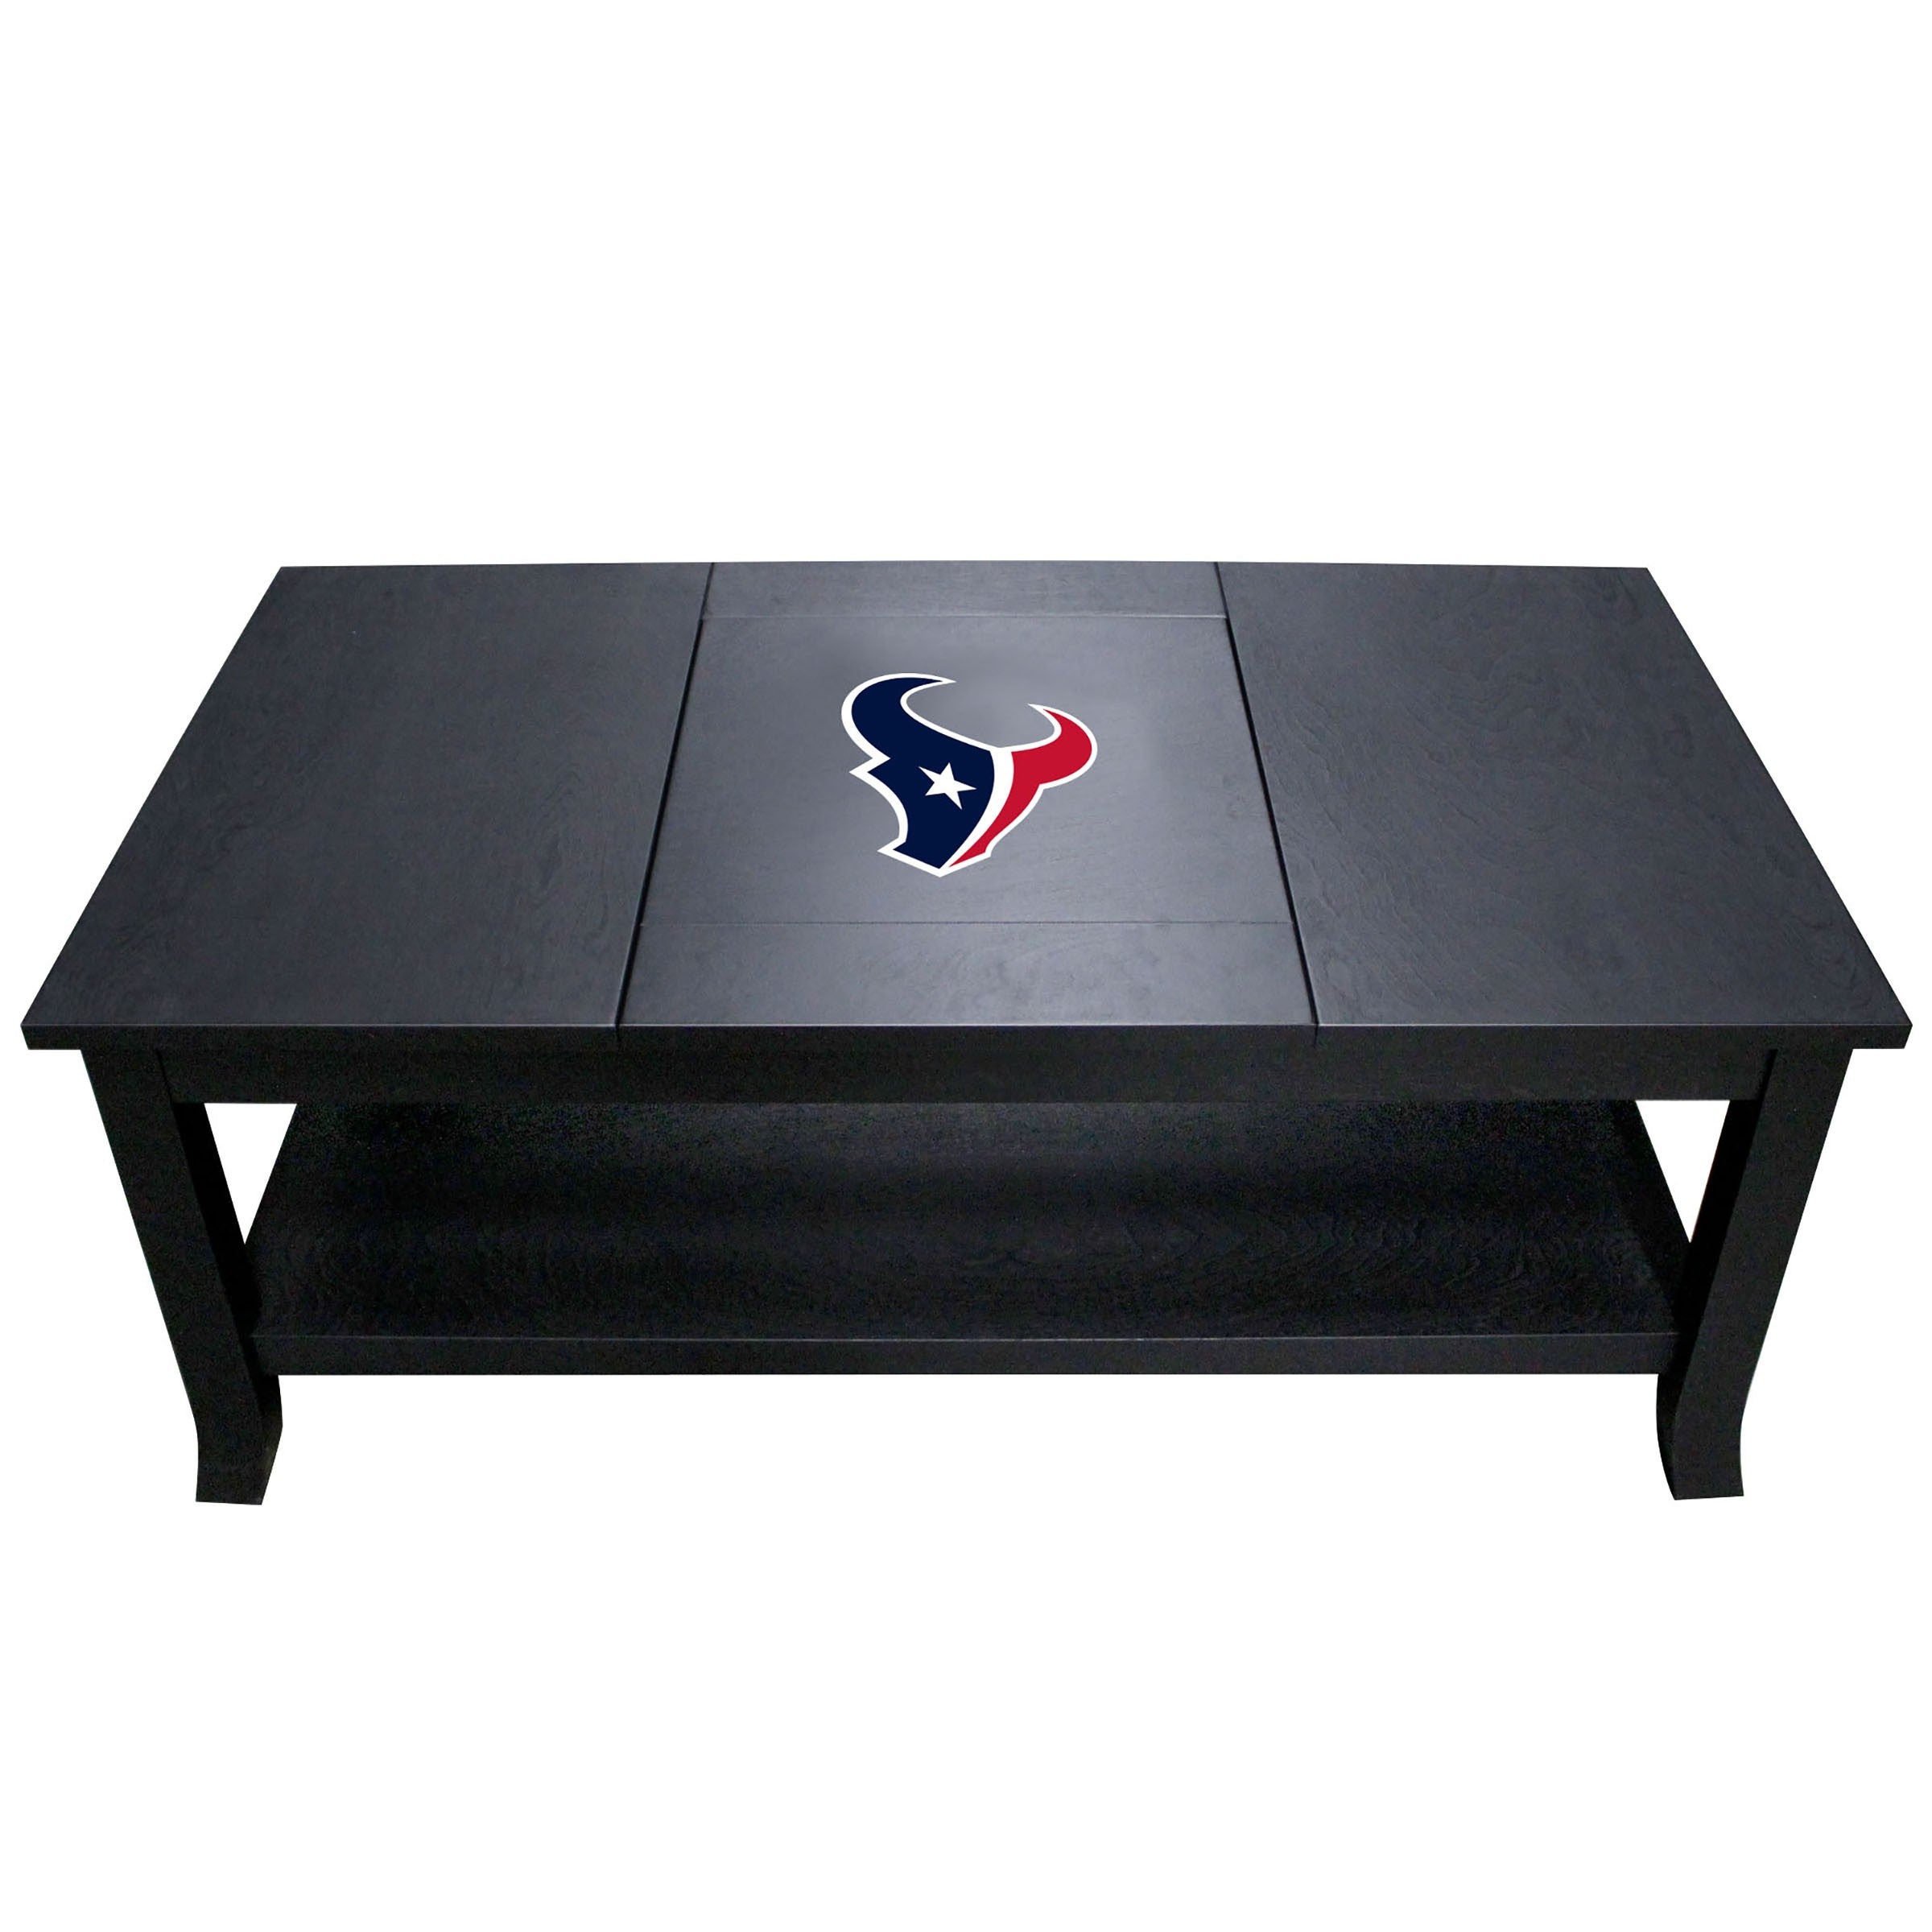 Imperial Houston Texans Coffee Table